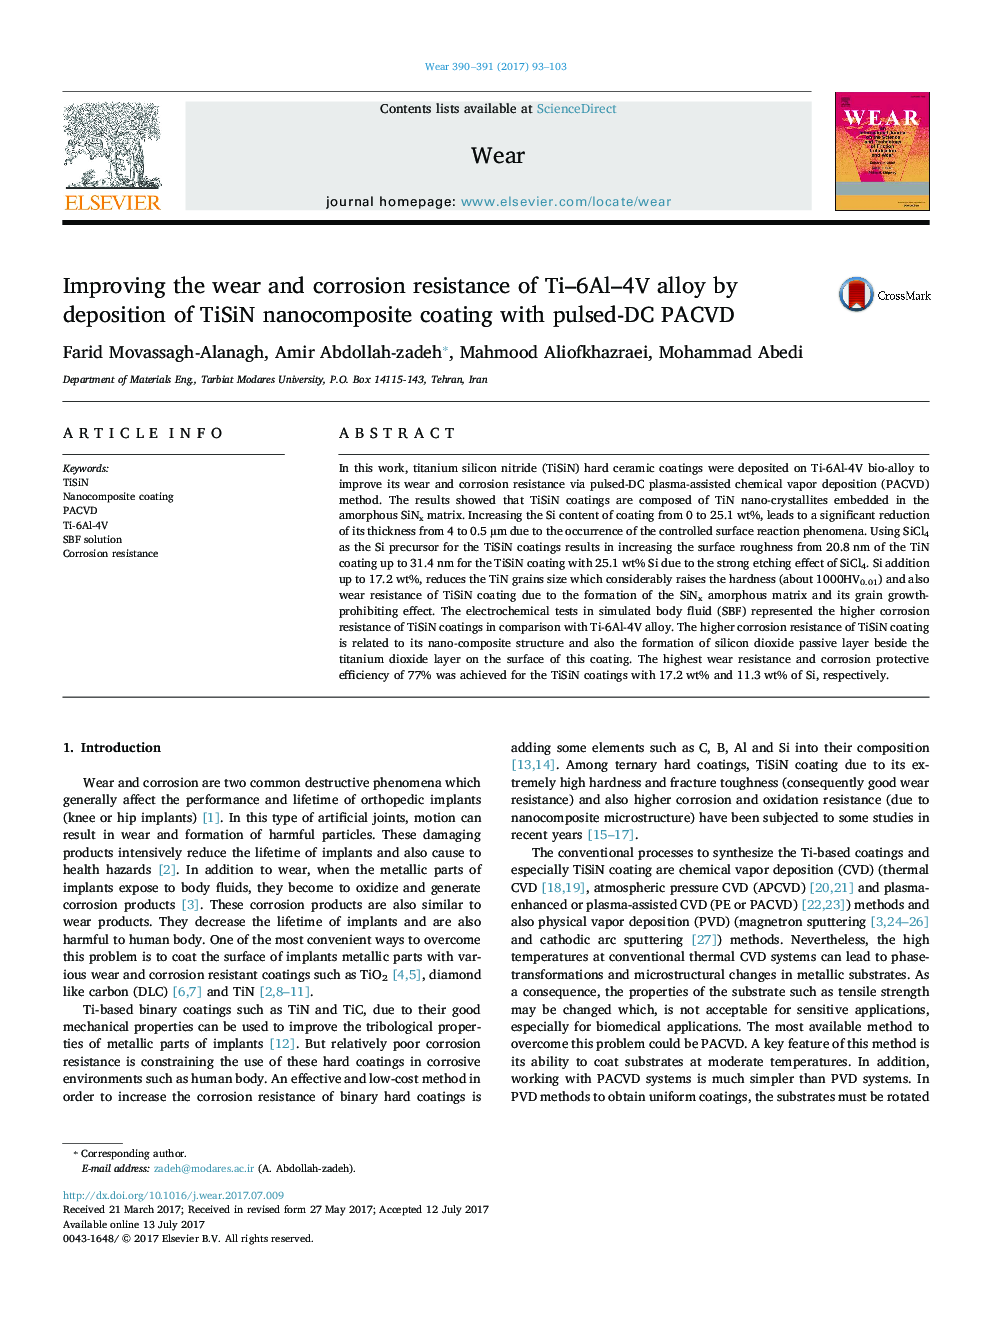 Improving the wear and corrosion resistance of Ti-6Al-4V alloy by deposition of TiSiN nanocomposite coating with pulsed-DC PACVD